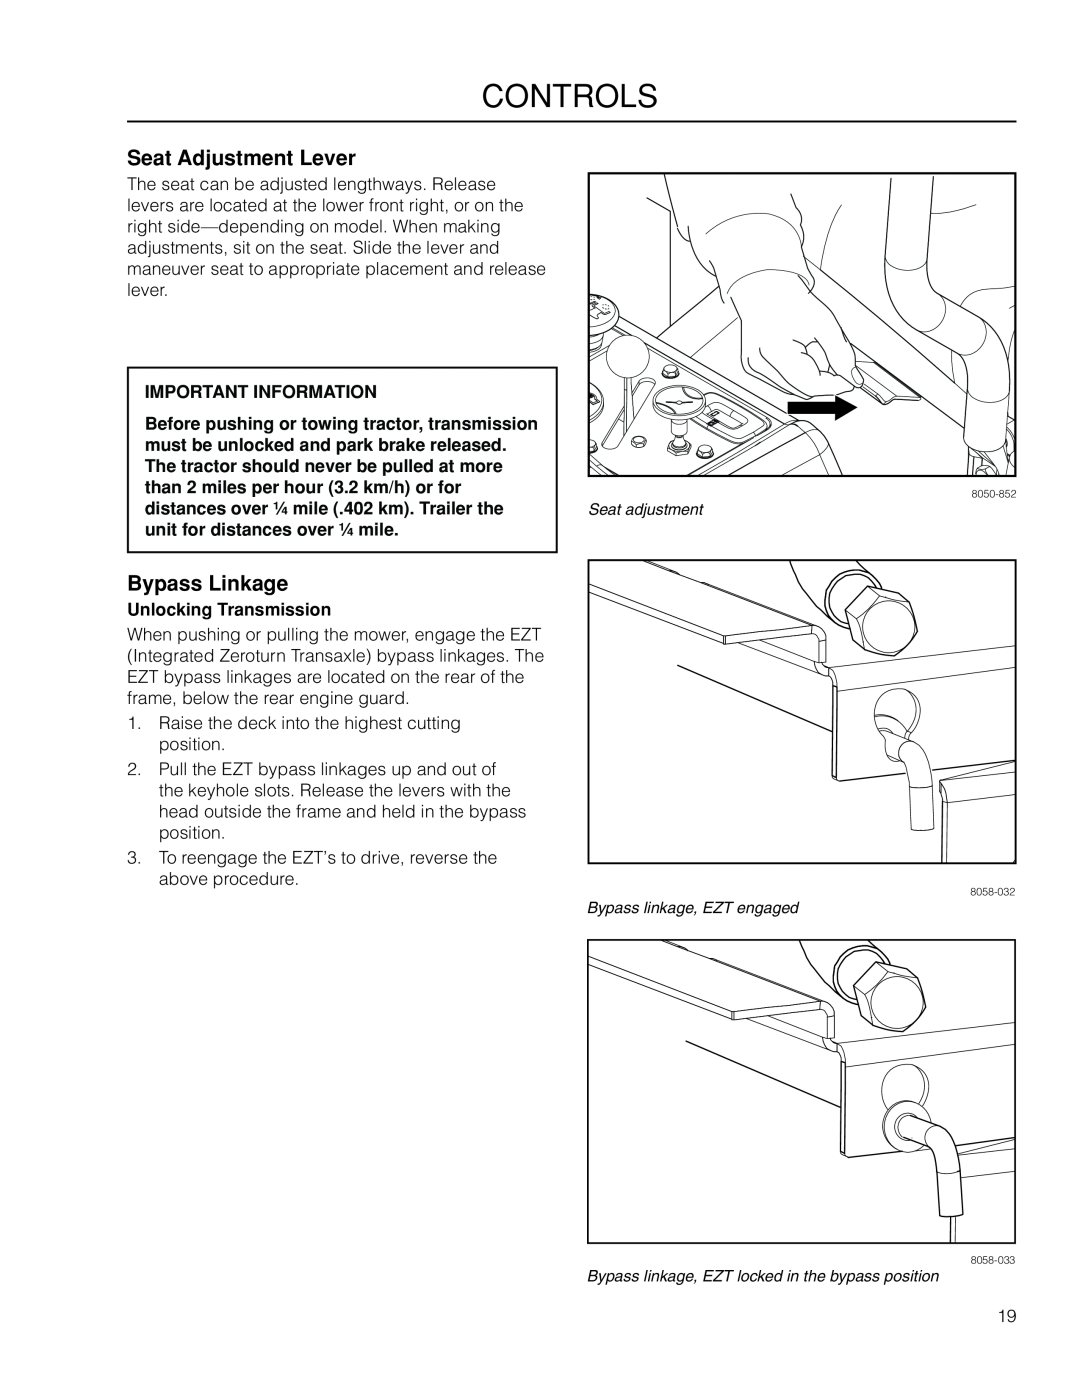 McCulloch 966564101, ZM4619 Seat Adjustment Lever, Bypass Linkage, Unlocking Transmission, Controls, Important Information 